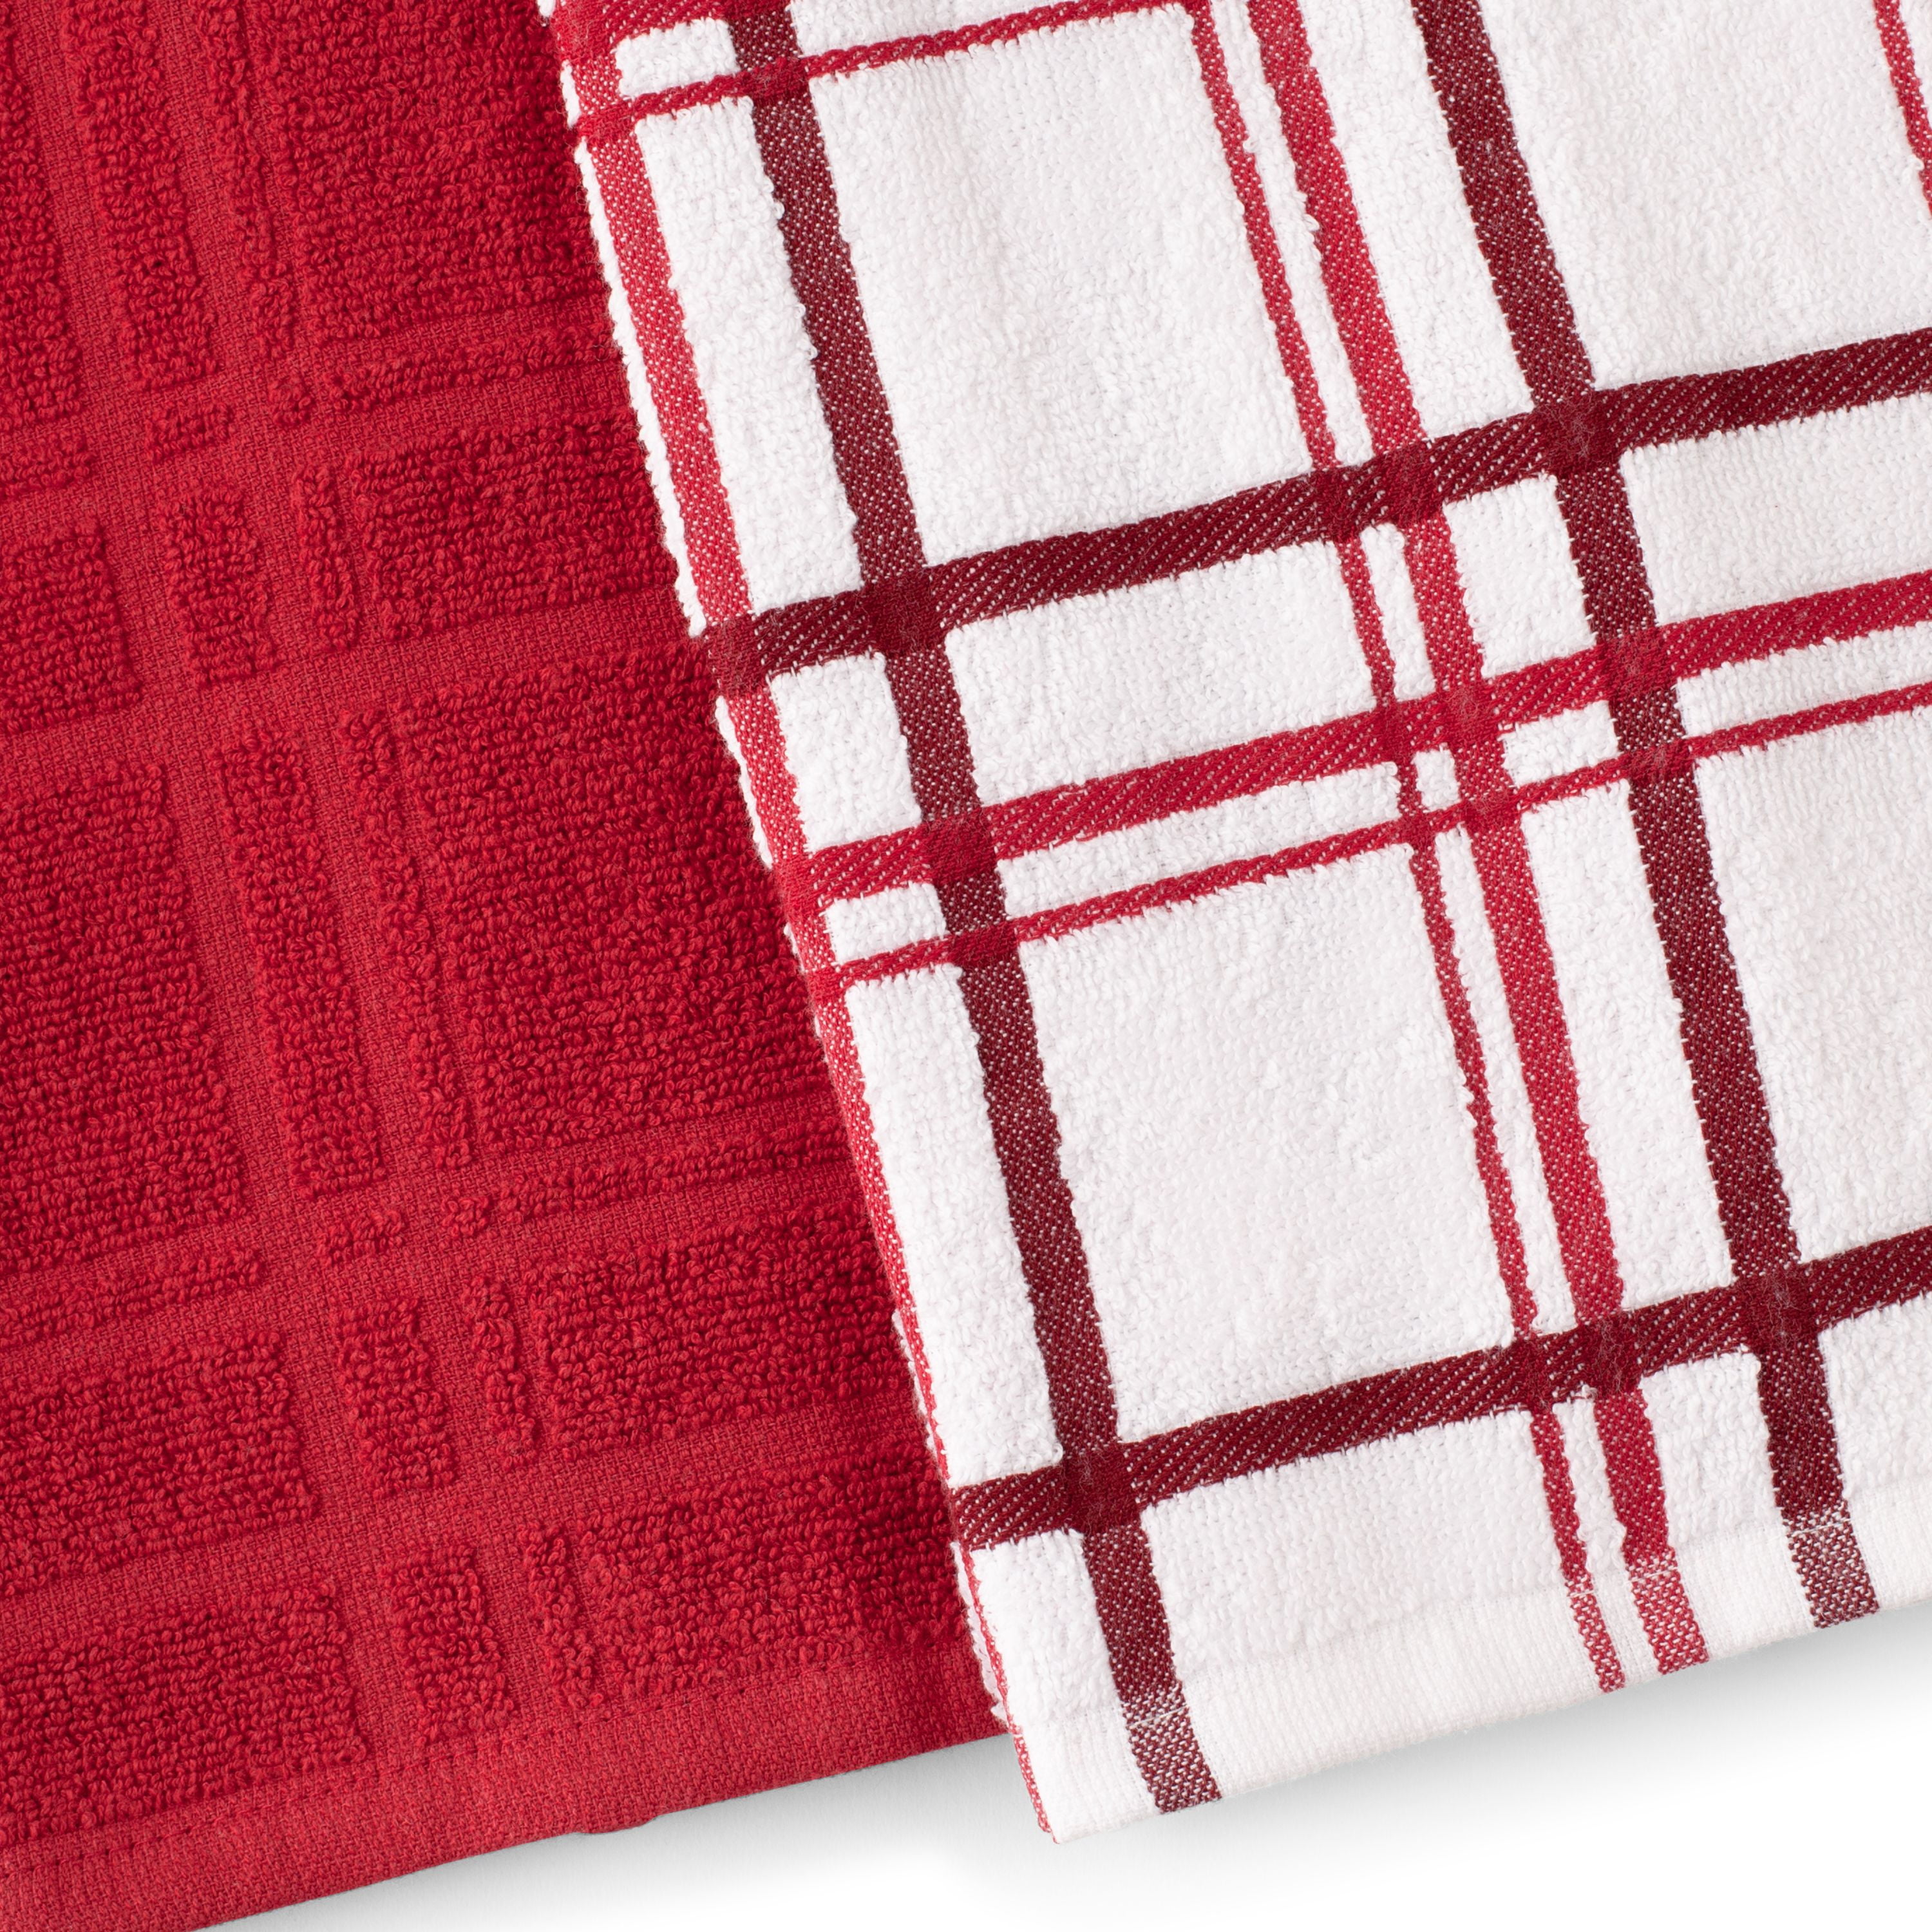 Kitchen Towels, Hand Printed Towels, Red, Farmhouse Towels, Set of